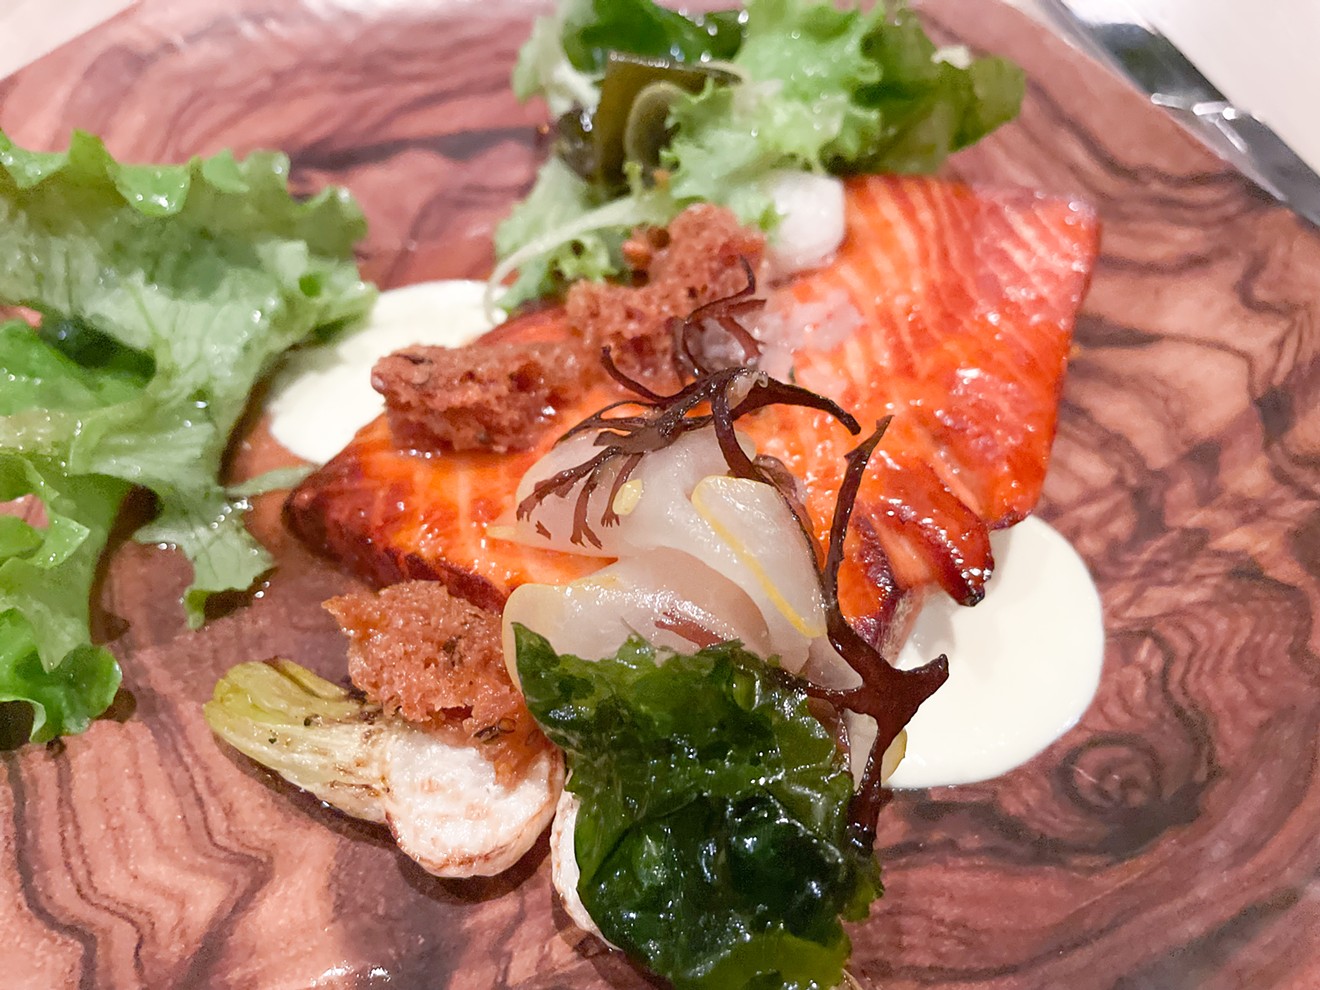 Quarter Acre serves a hot-smoked style of salmon, which is a popular cooking method in New Zealand